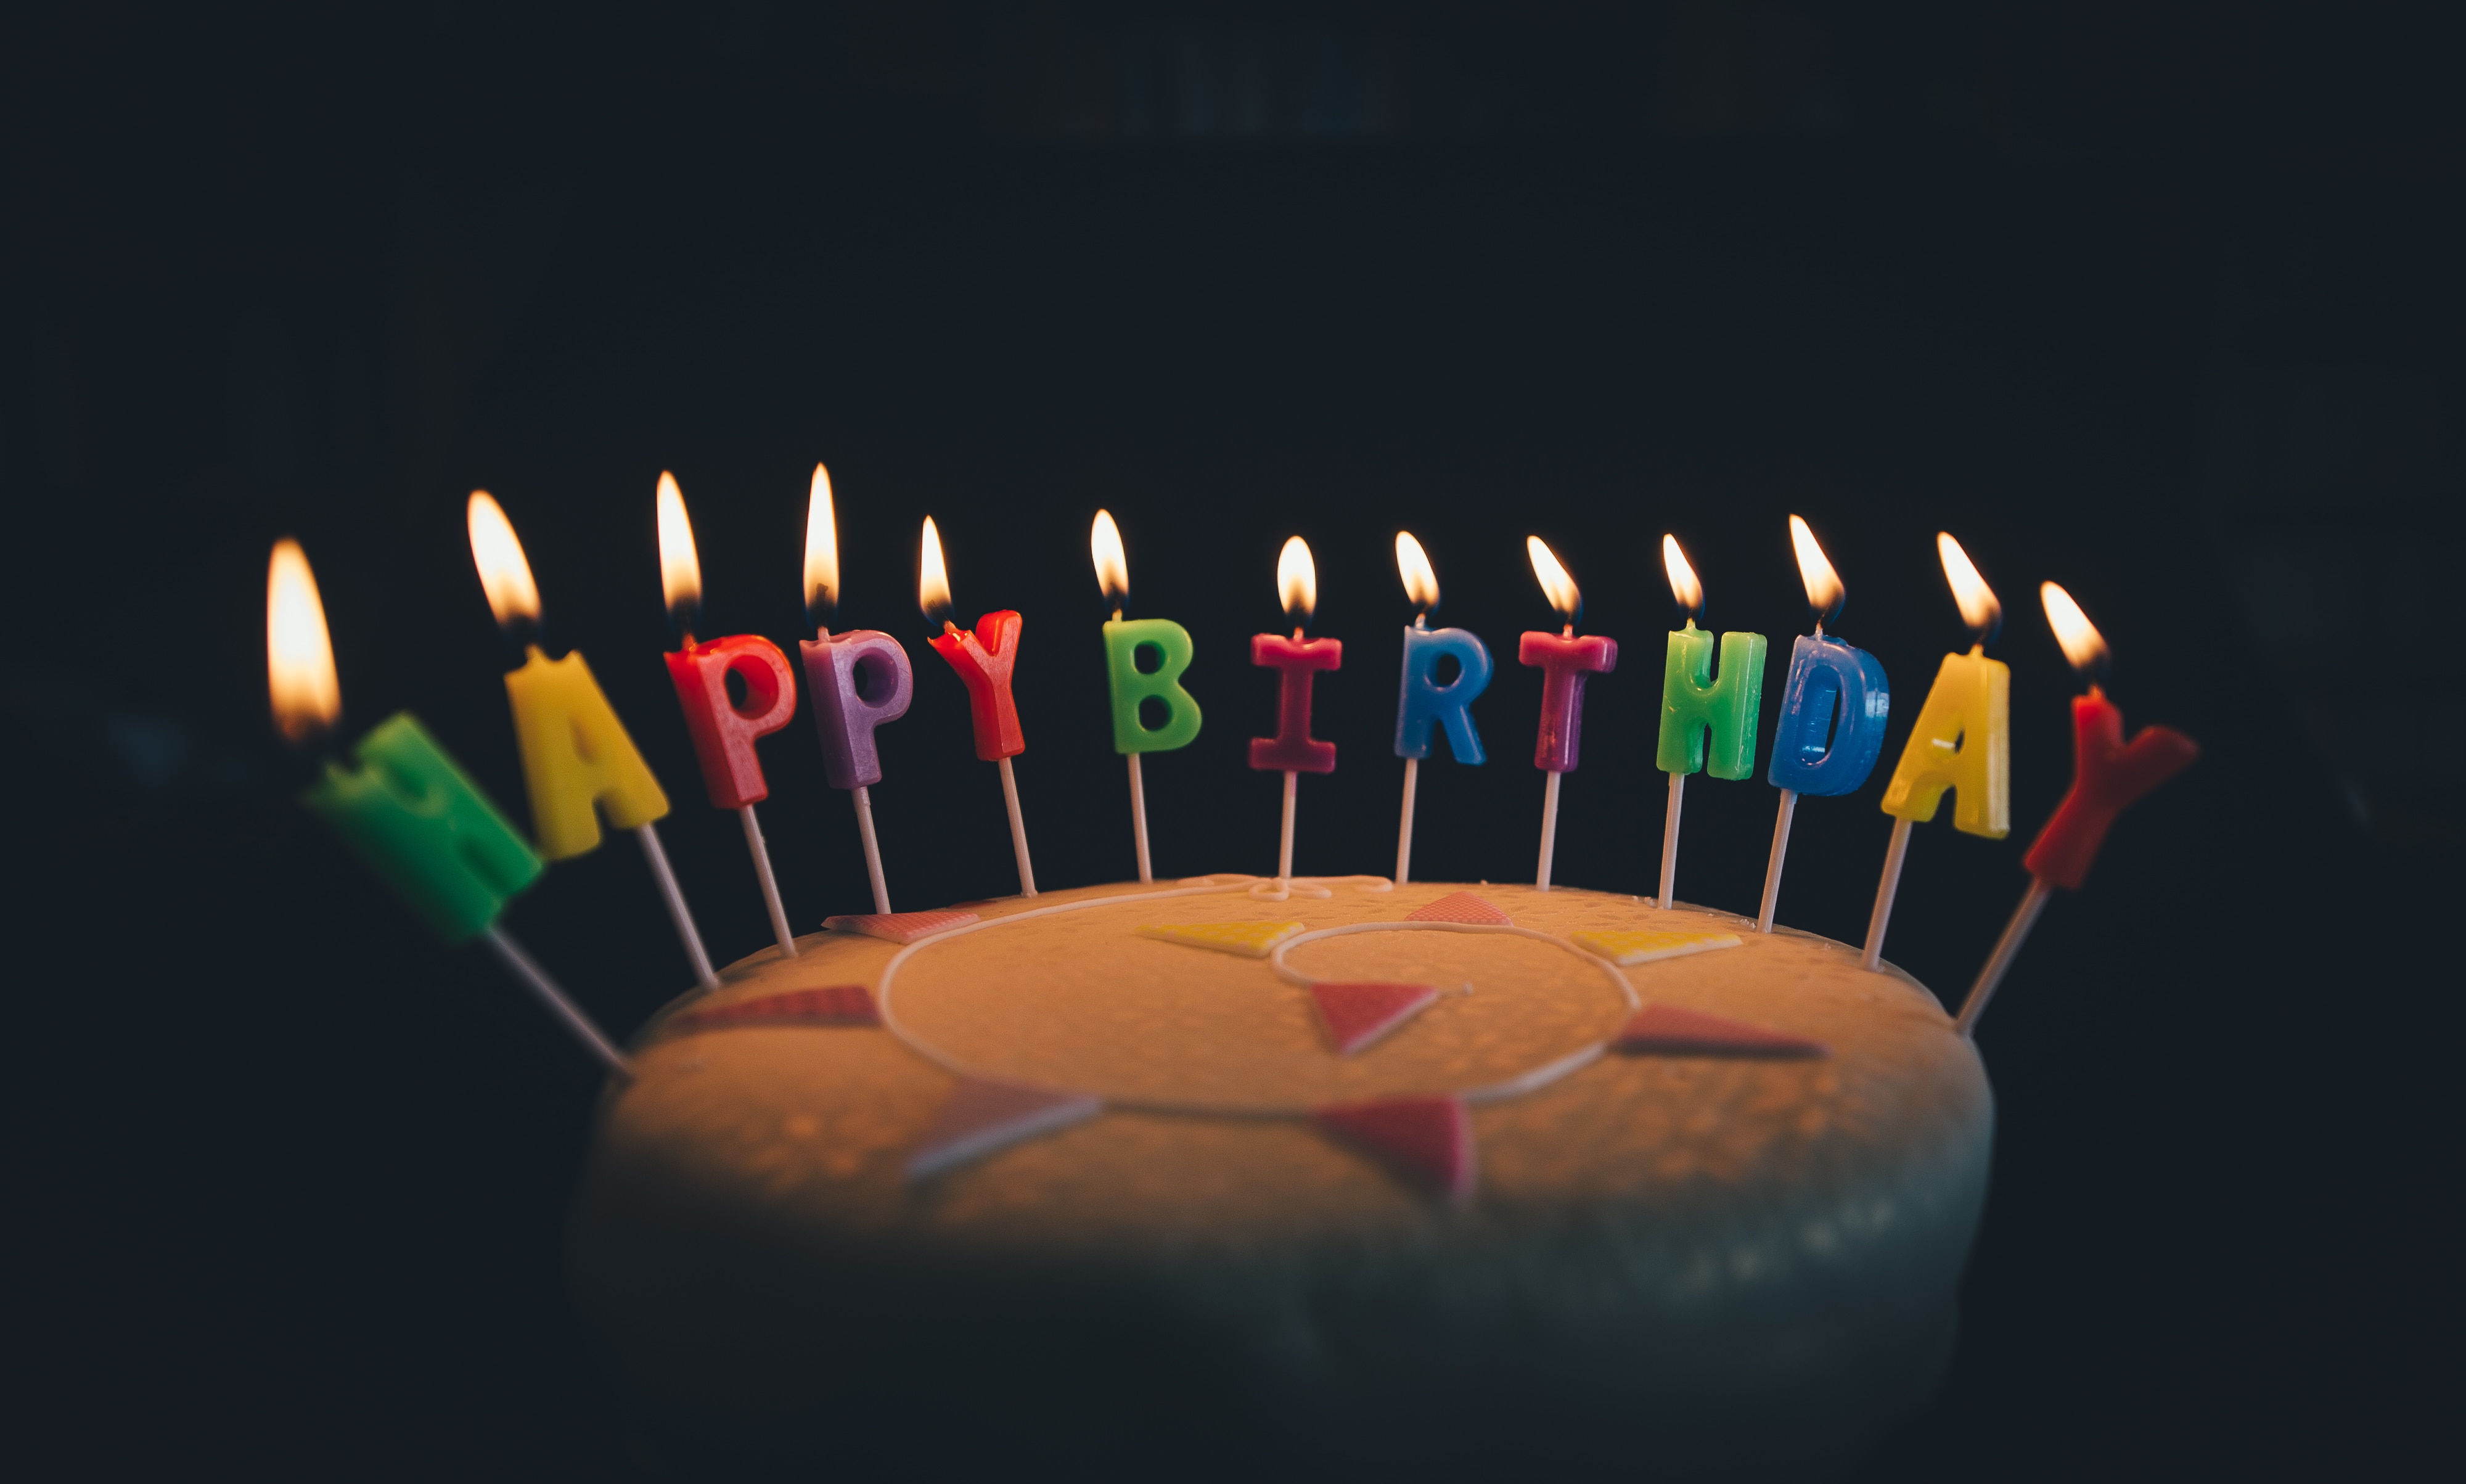 round cake with lighted happy birthday candles